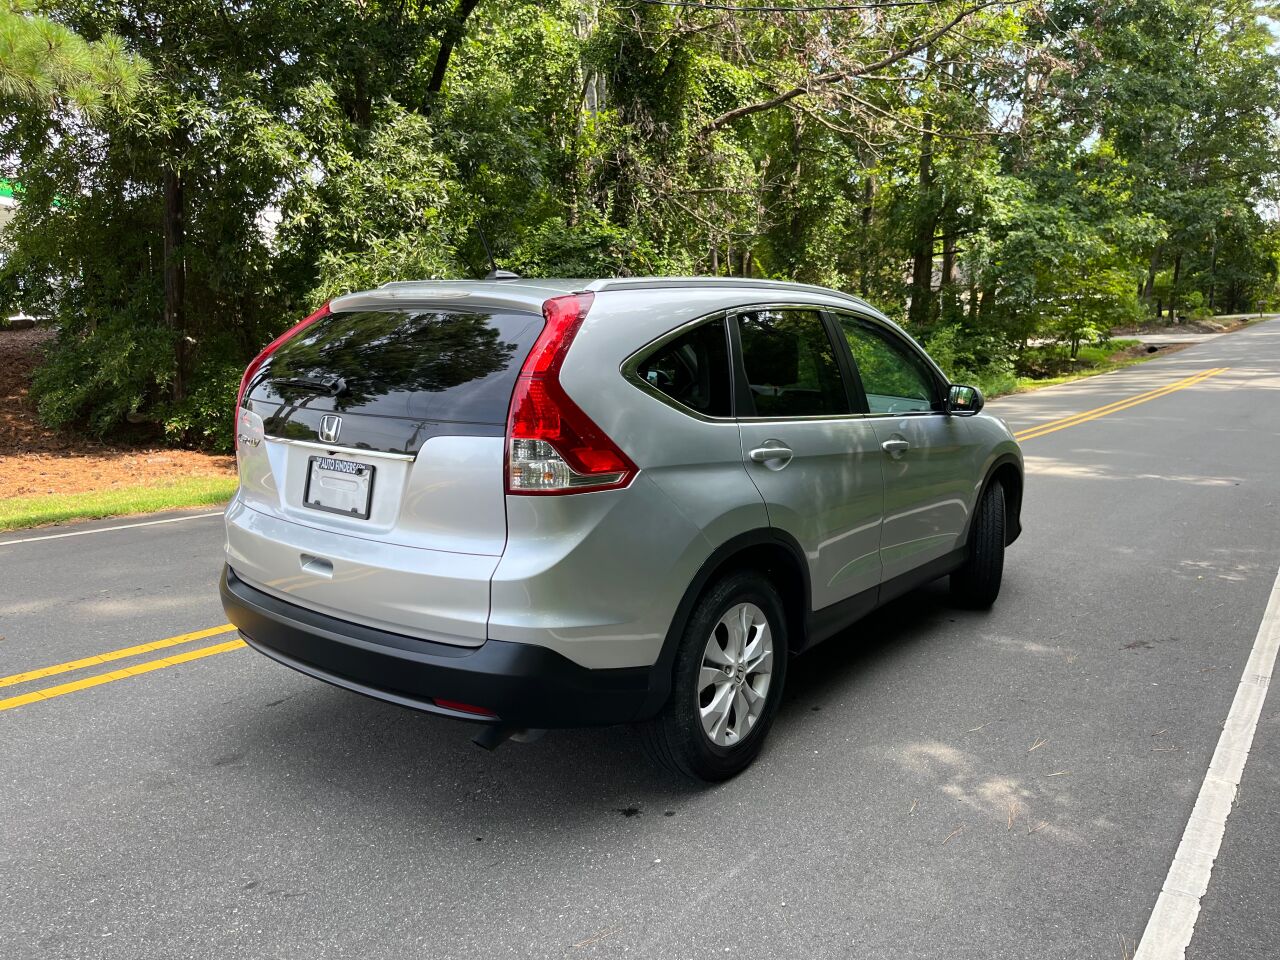 Preowned 2014 HONDA CR-V EX-L FWD for sale by The Auto Finders Car Dealership of Durham in Durham, NC